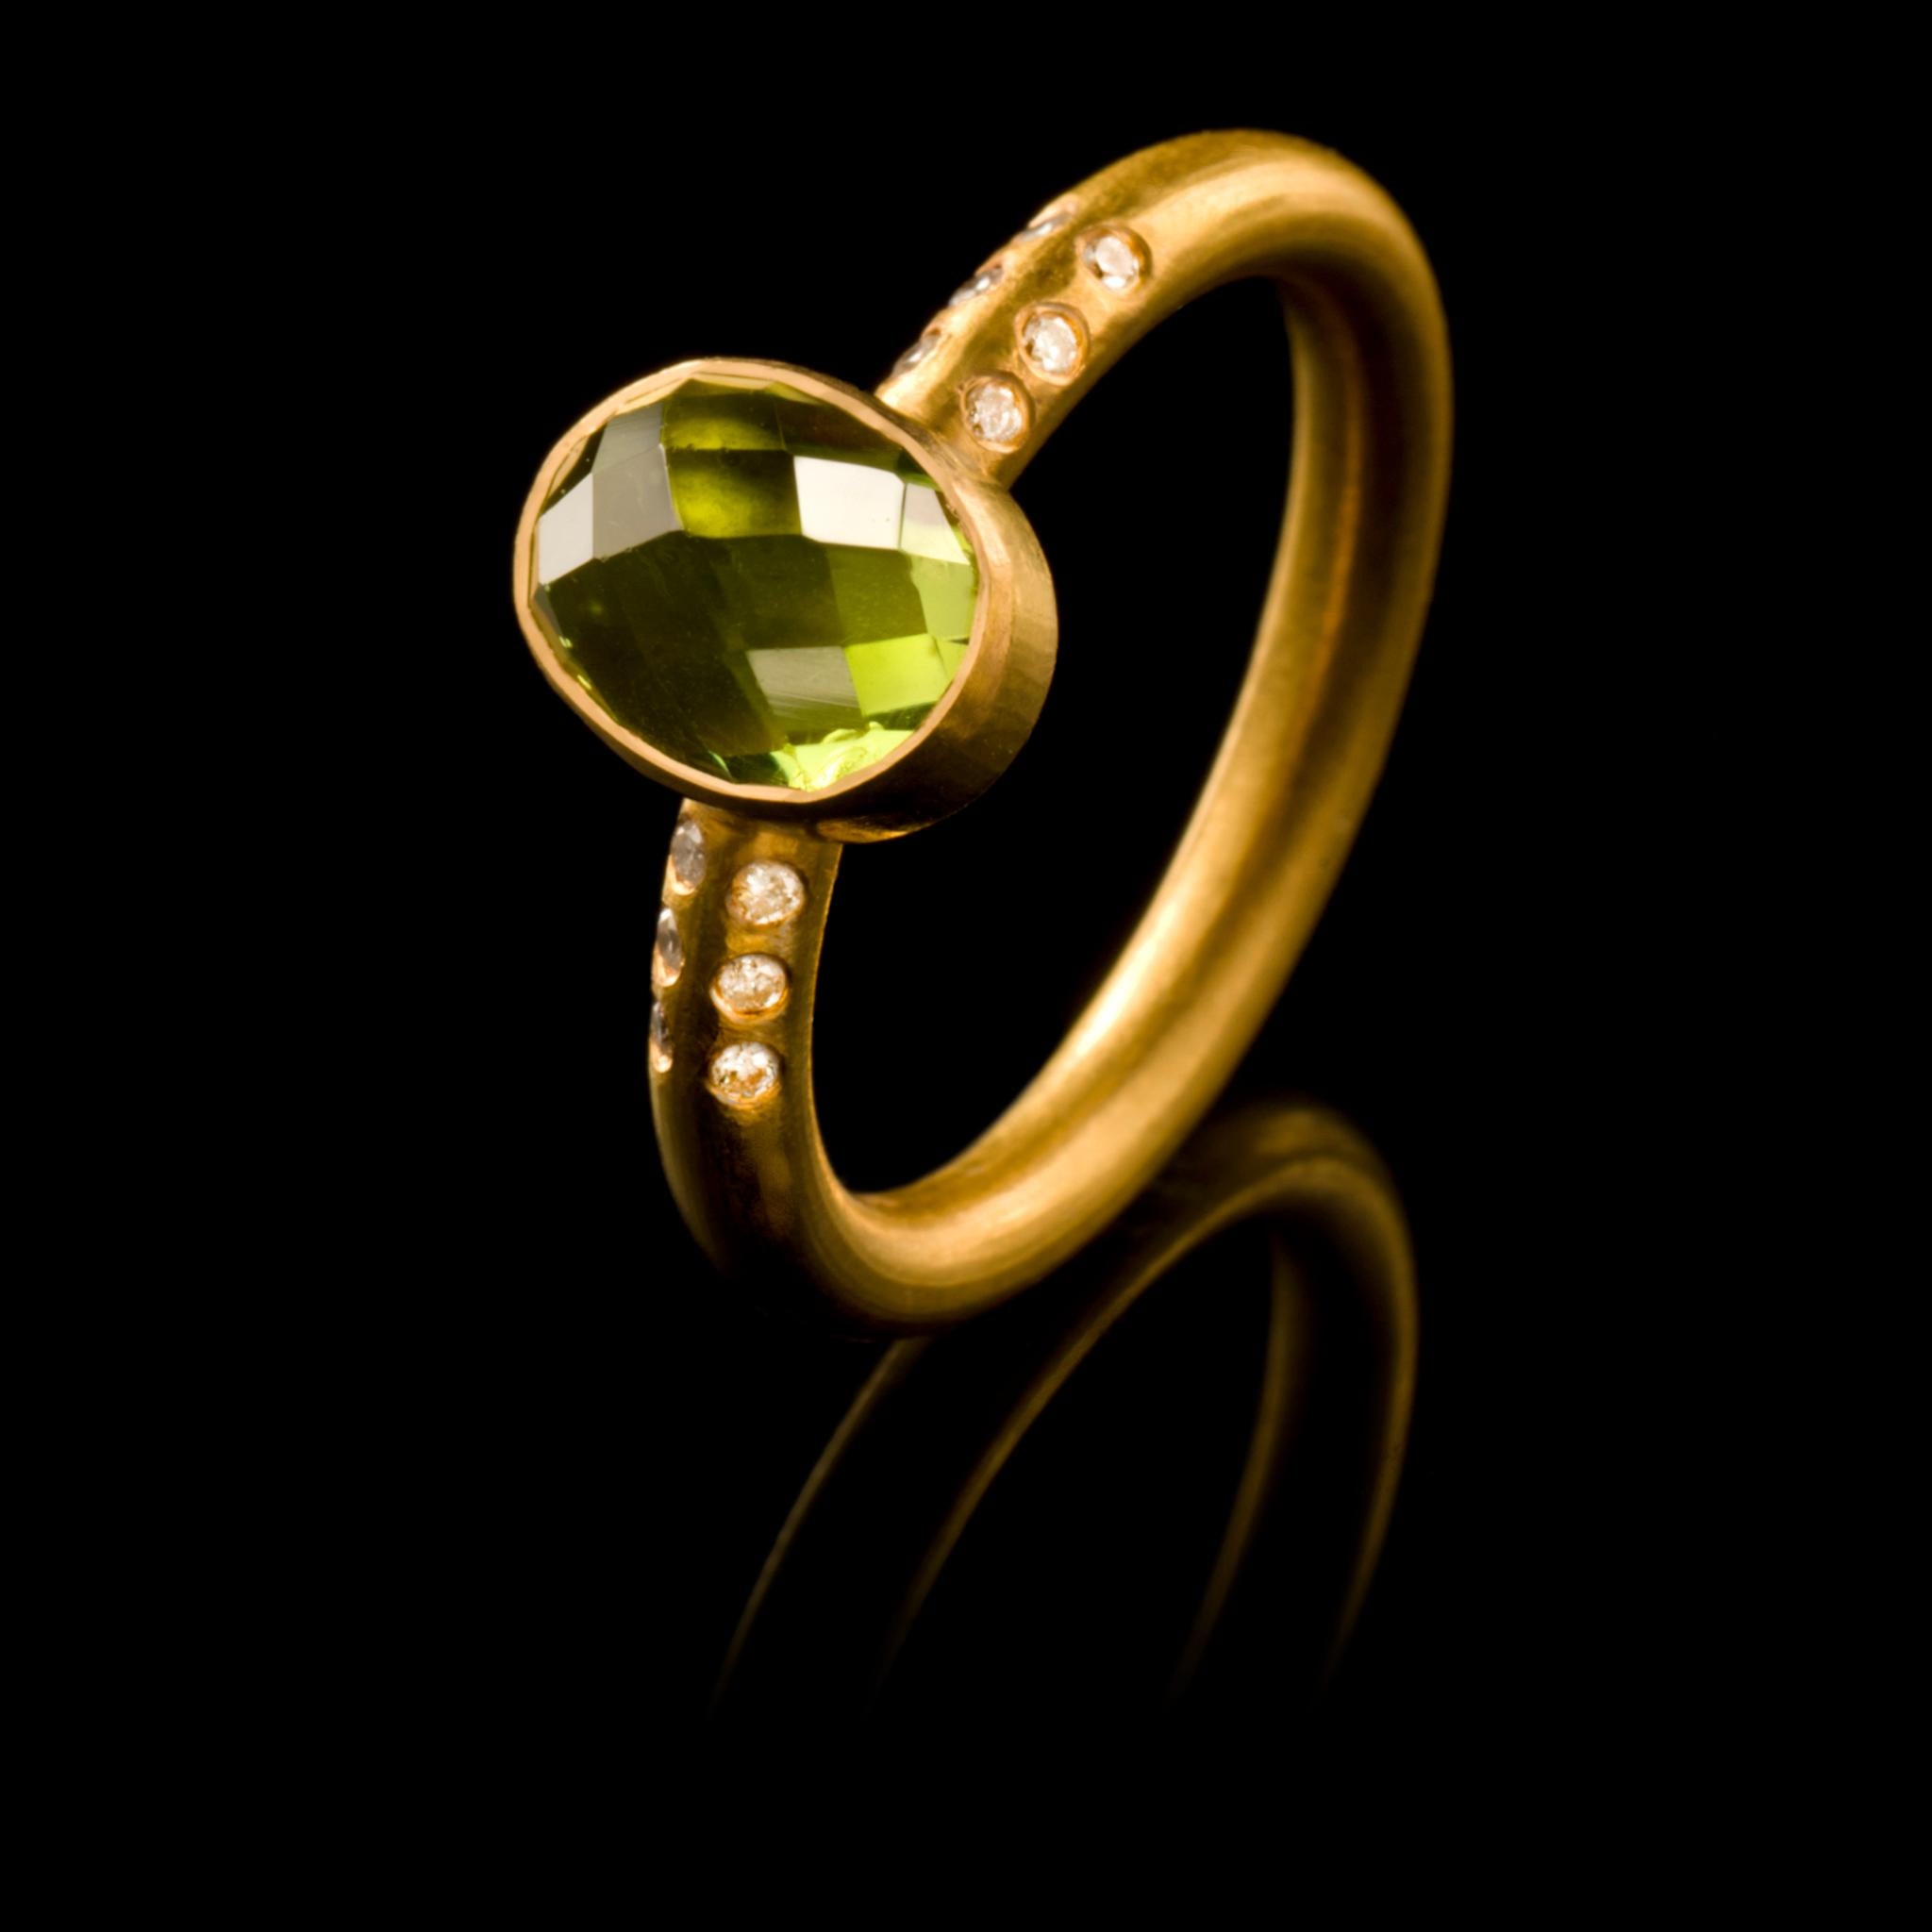 A chic, hand crafted 18 karat matte gold stacking ring with an oval cut peridot flanked by six diamonds either side. Size: UK O/P US 7.5 EUROPE 55.5 The ring can be resized. Wear it on its own or with other rings from the collection as shown on our